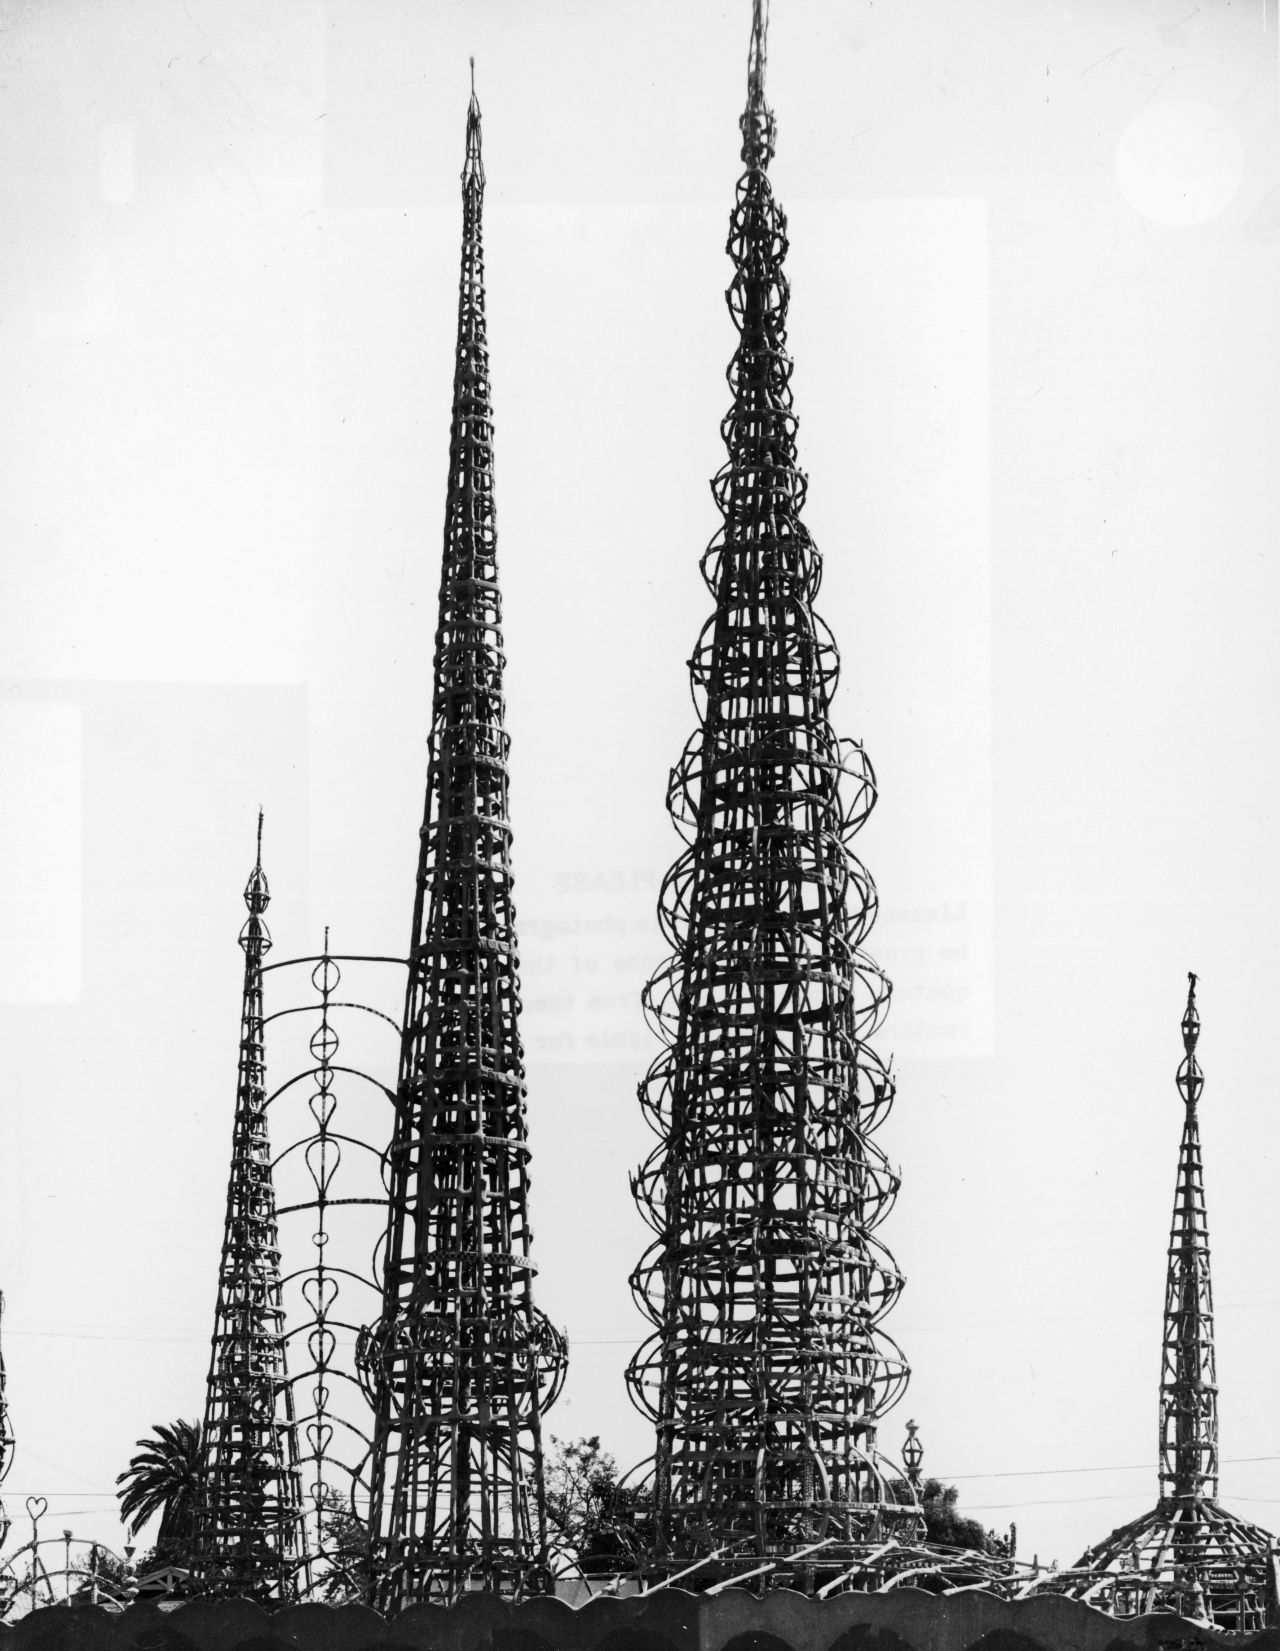 The Watts Towers were built between the 1920s and 50s and are a much-loved example of so-called "vernacular" or folk art. 